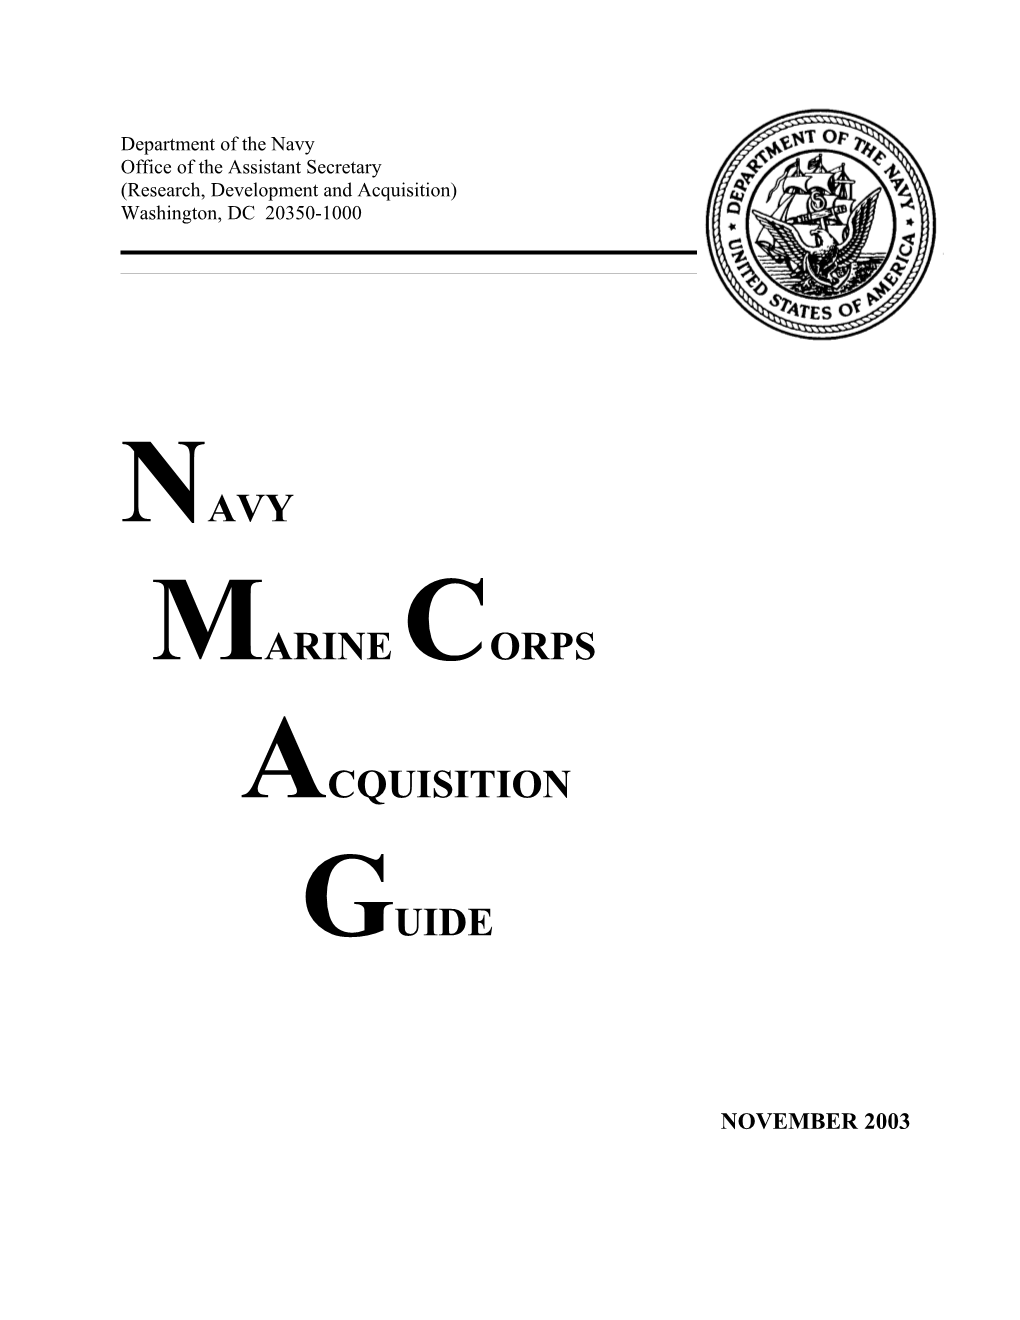 Navy Marine Corps Acquisition Guide